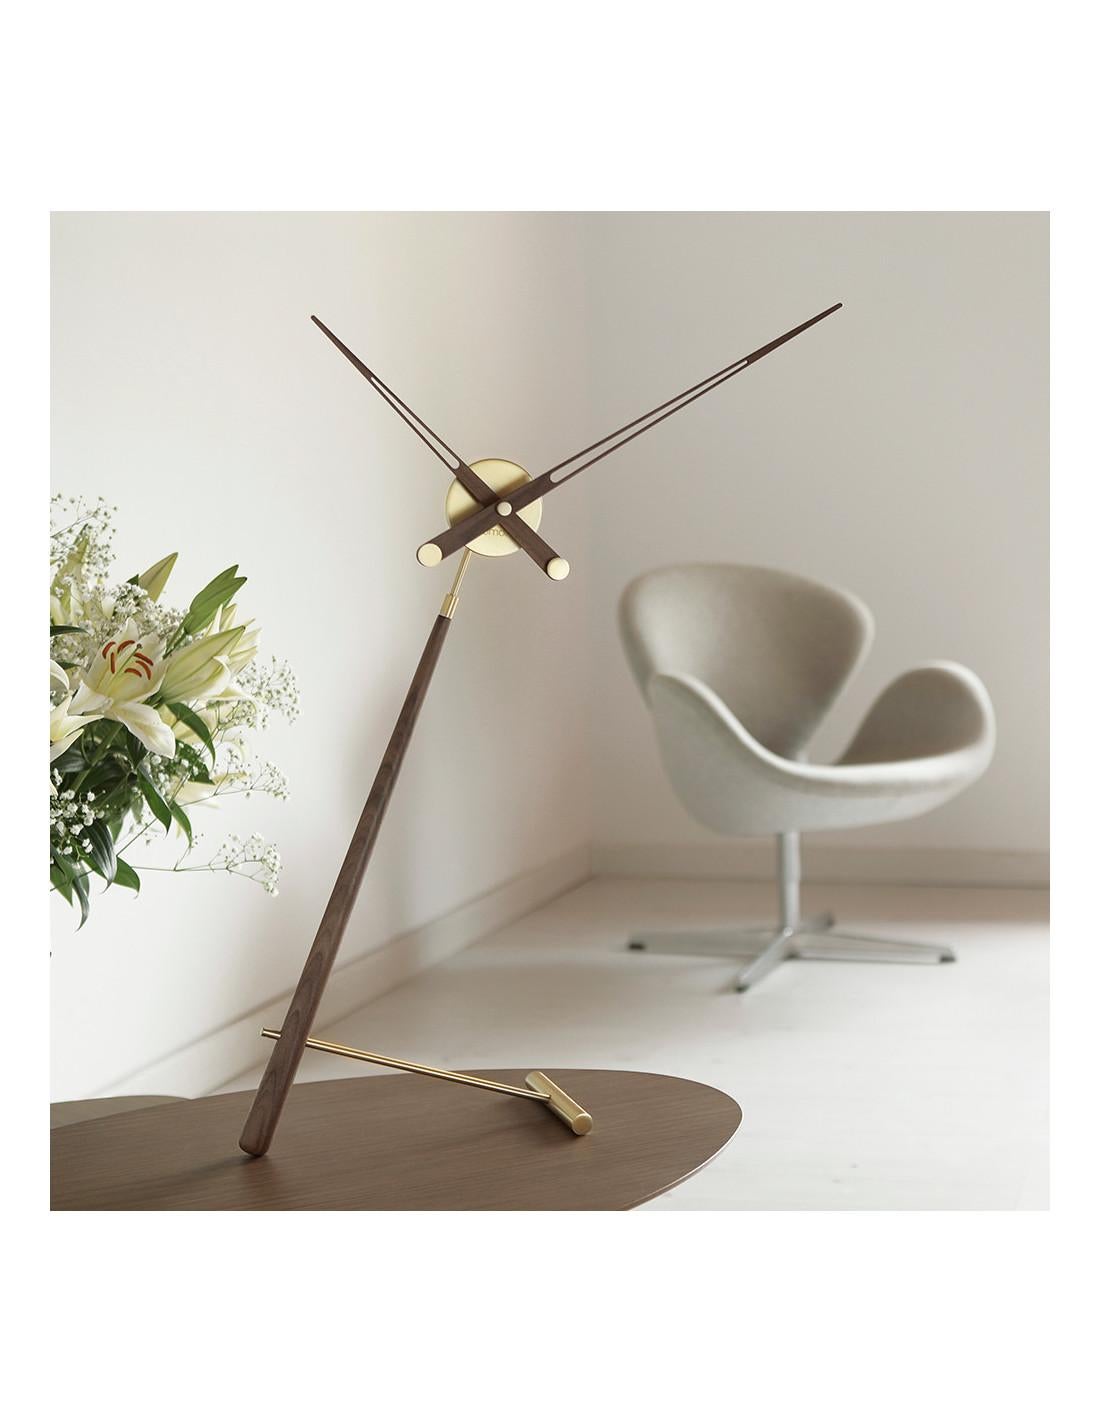 Puntero G table clock is a clock whose design makes it an elegant and stylish decorative piece.
The German UTS mechanism guarantees the accuracy of its operation over the years.
Puntero G table clock : Box in polished brass, hands and body in